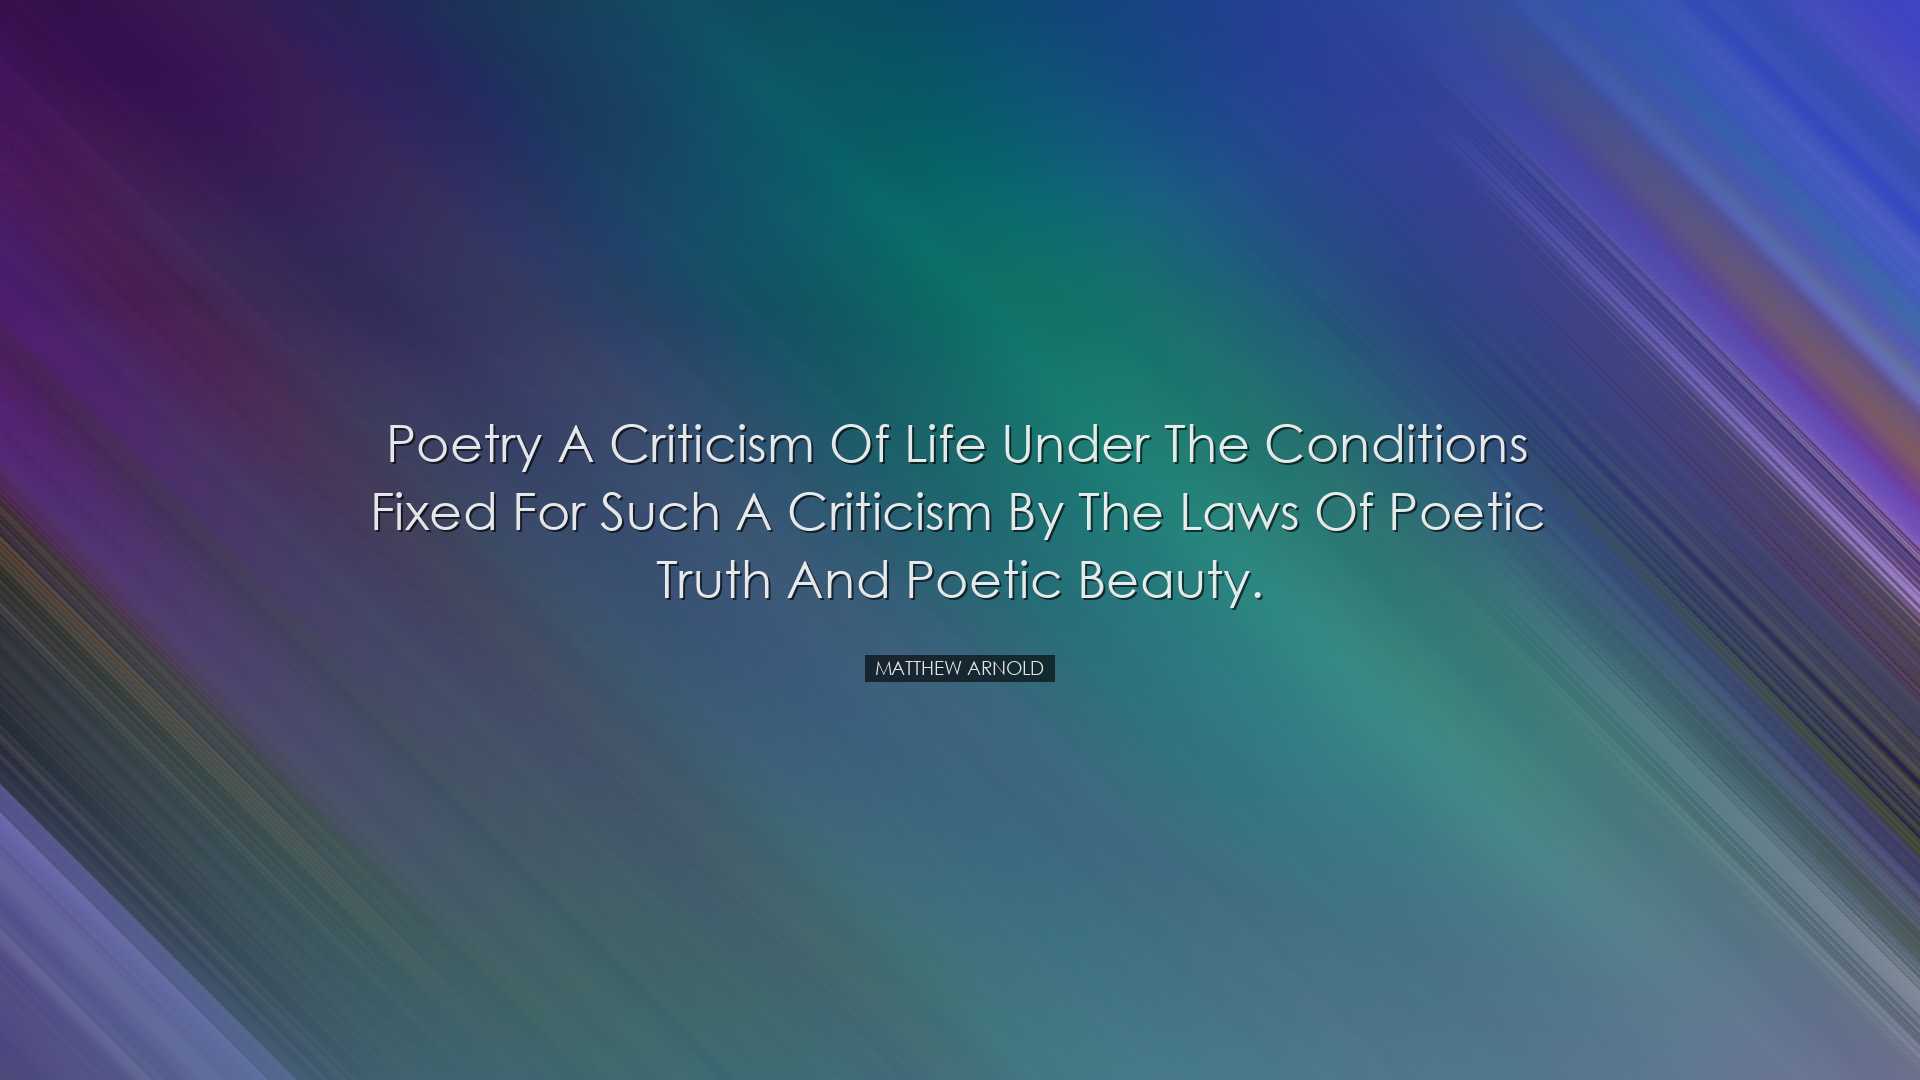 Poetry a criticism of life under the conditions fixed for such a c